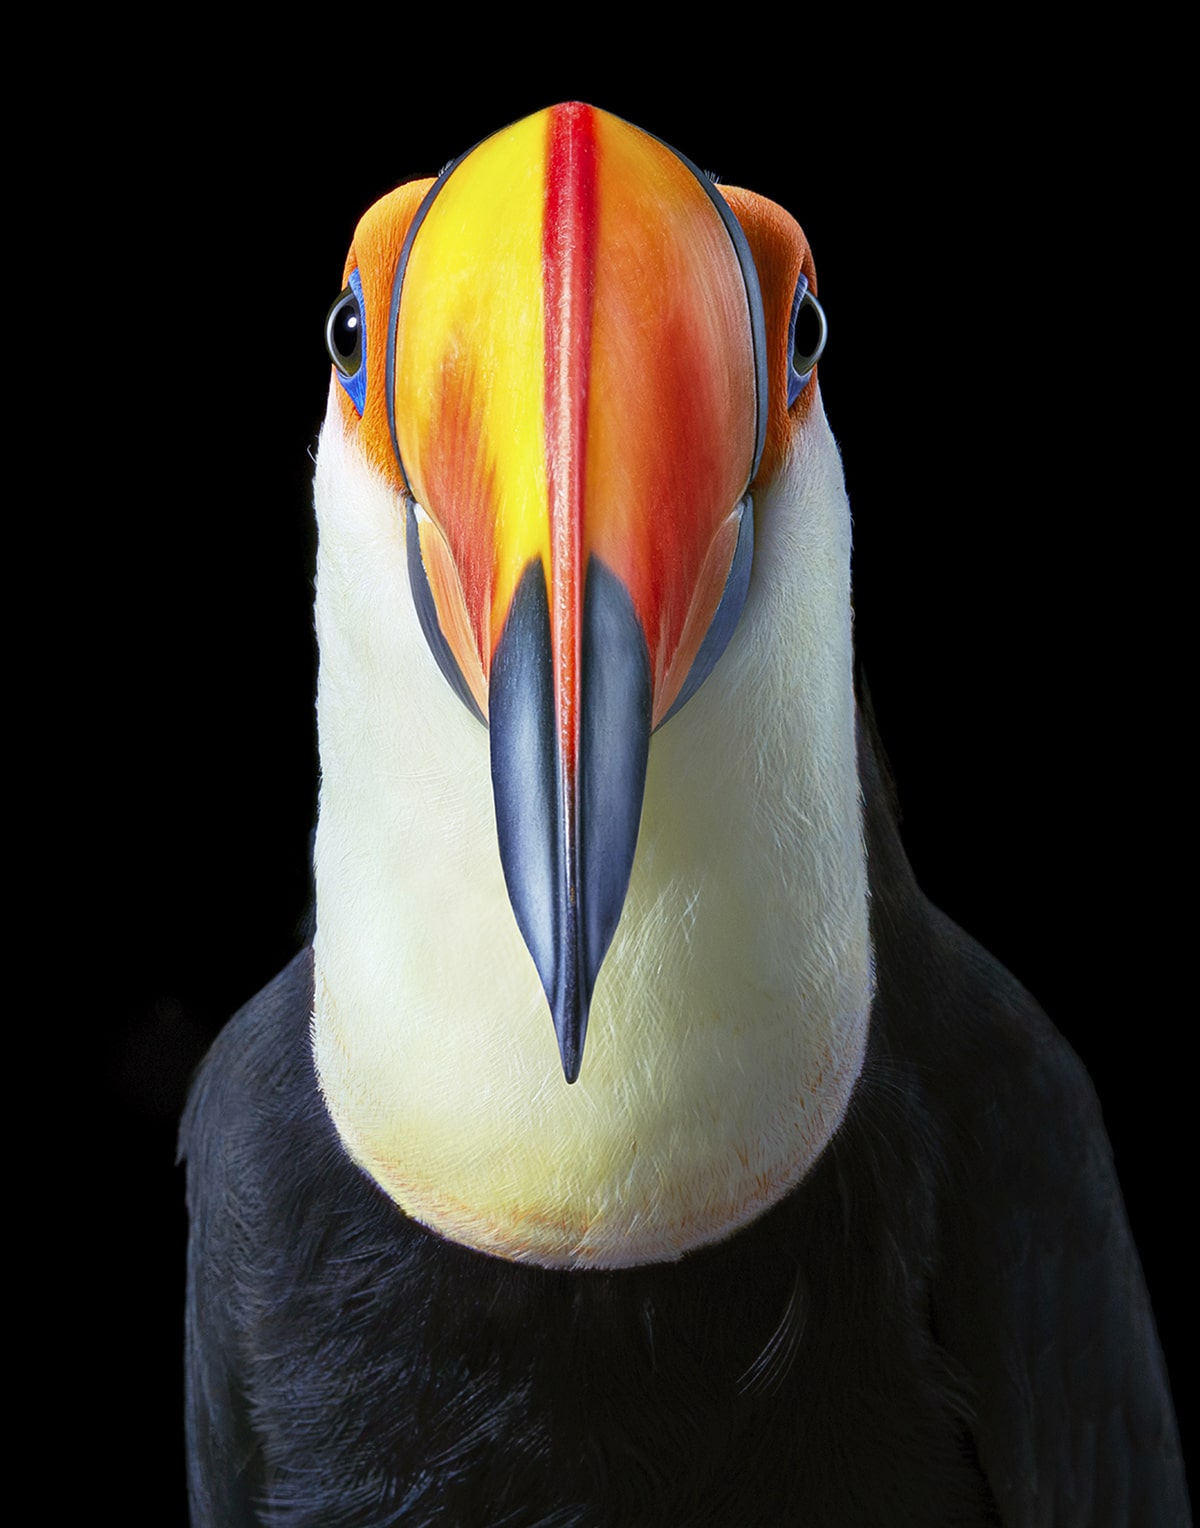 Toco Toucan Tim Flach Photography